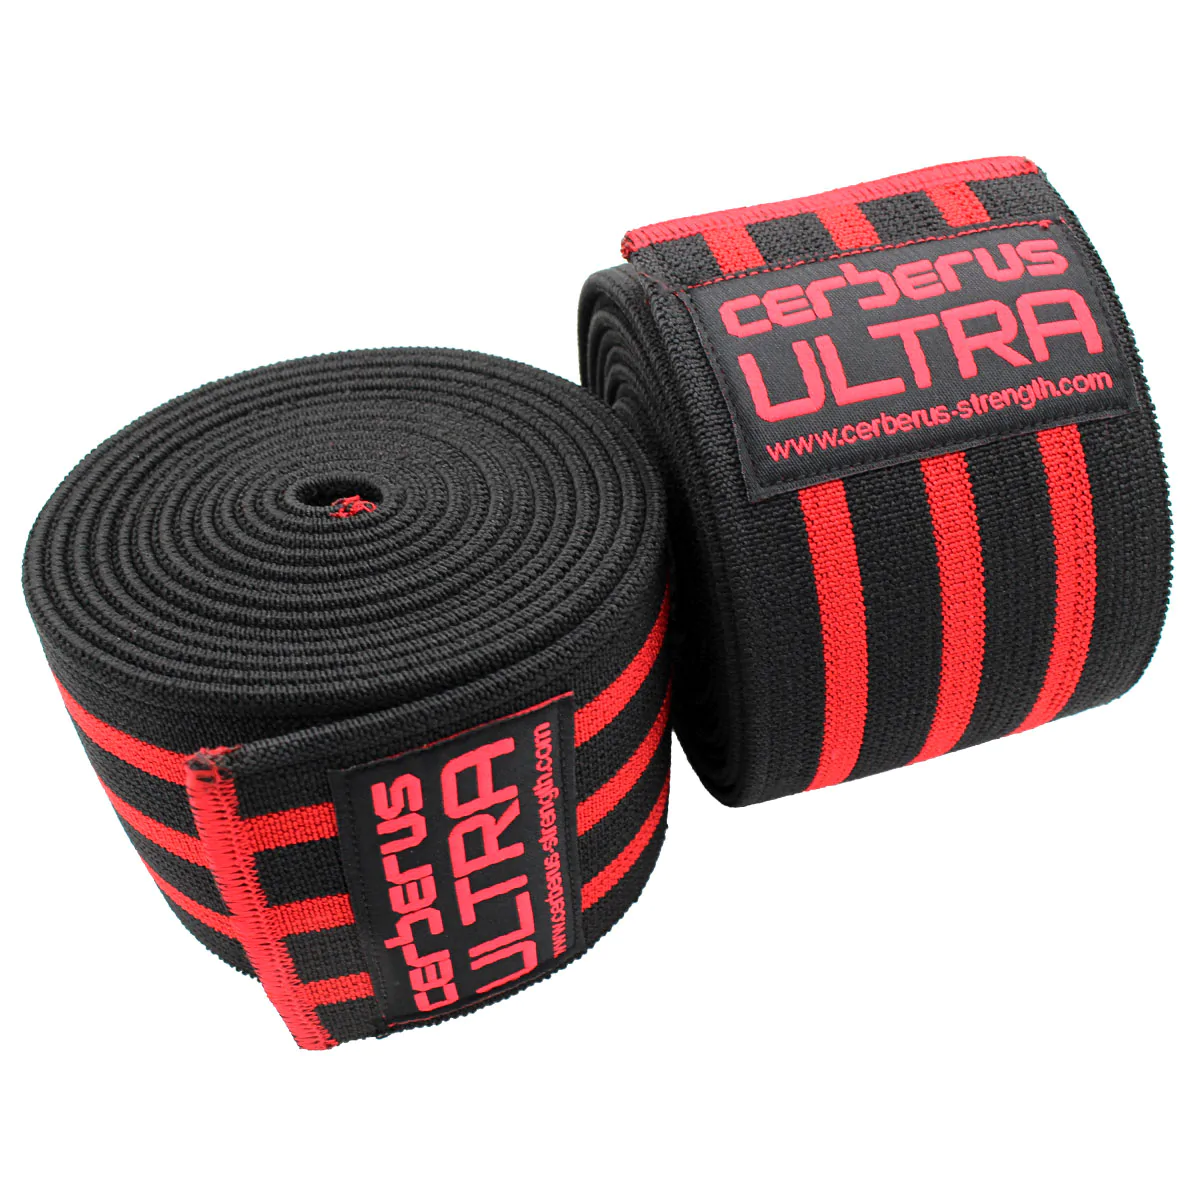 Strength Shop Thor Knee Wraps 2m and 2.5m Black strongman powerlifting 